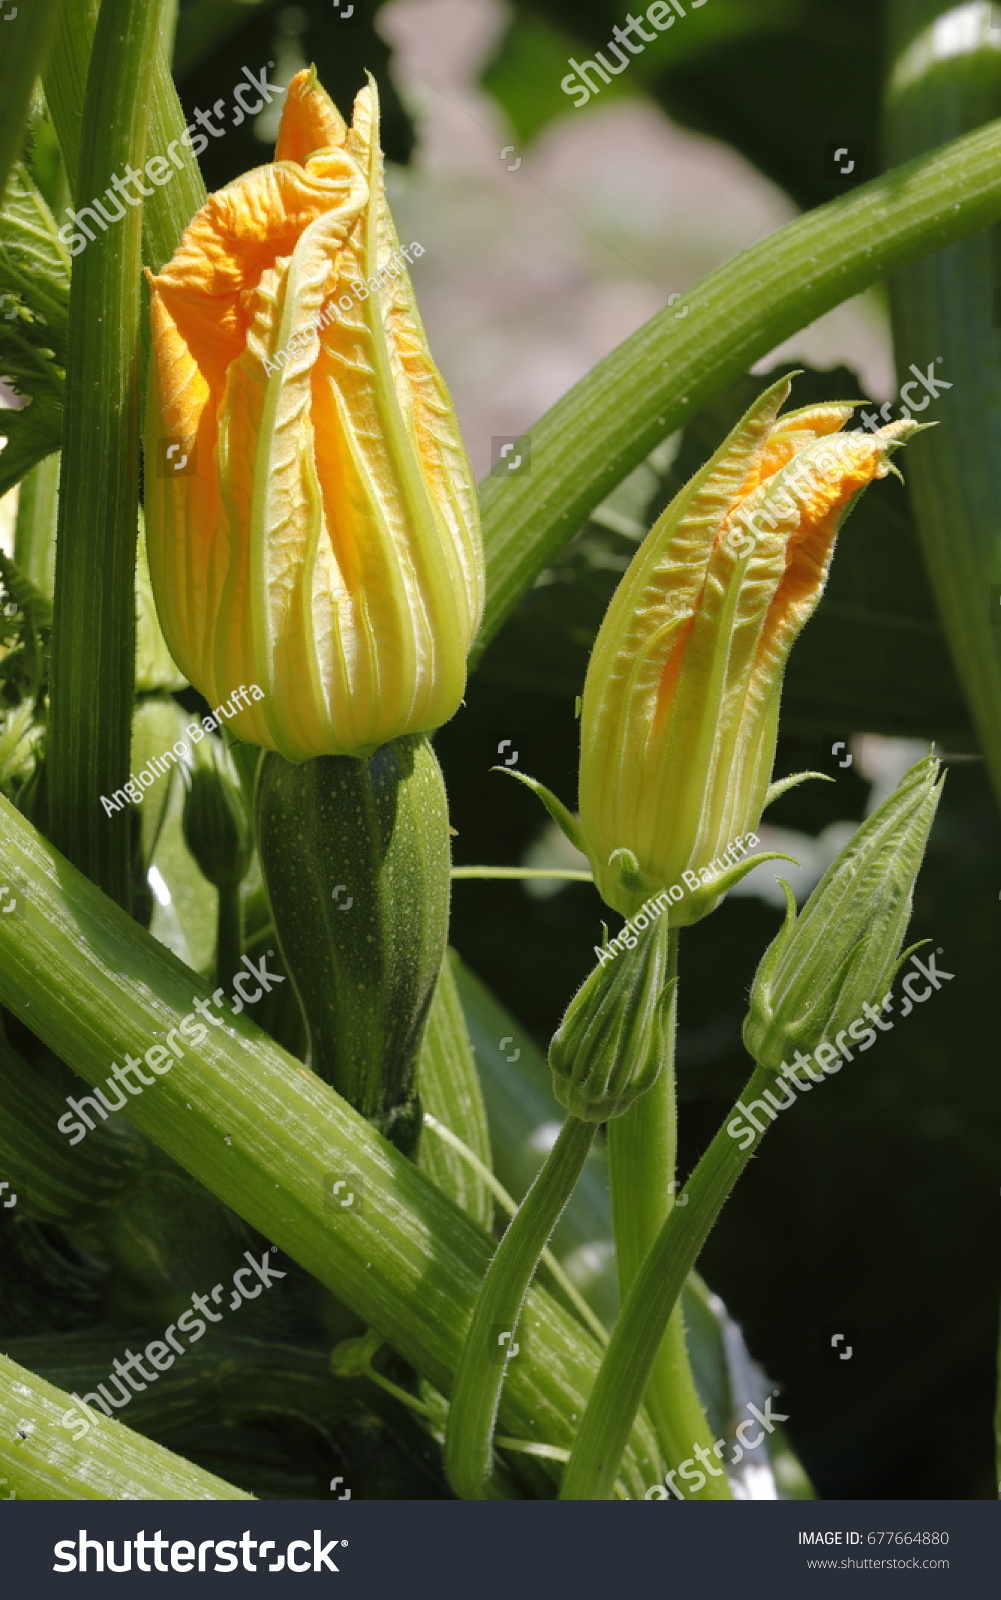 Some pumpkin flowers are blossoming in the garden #677664880